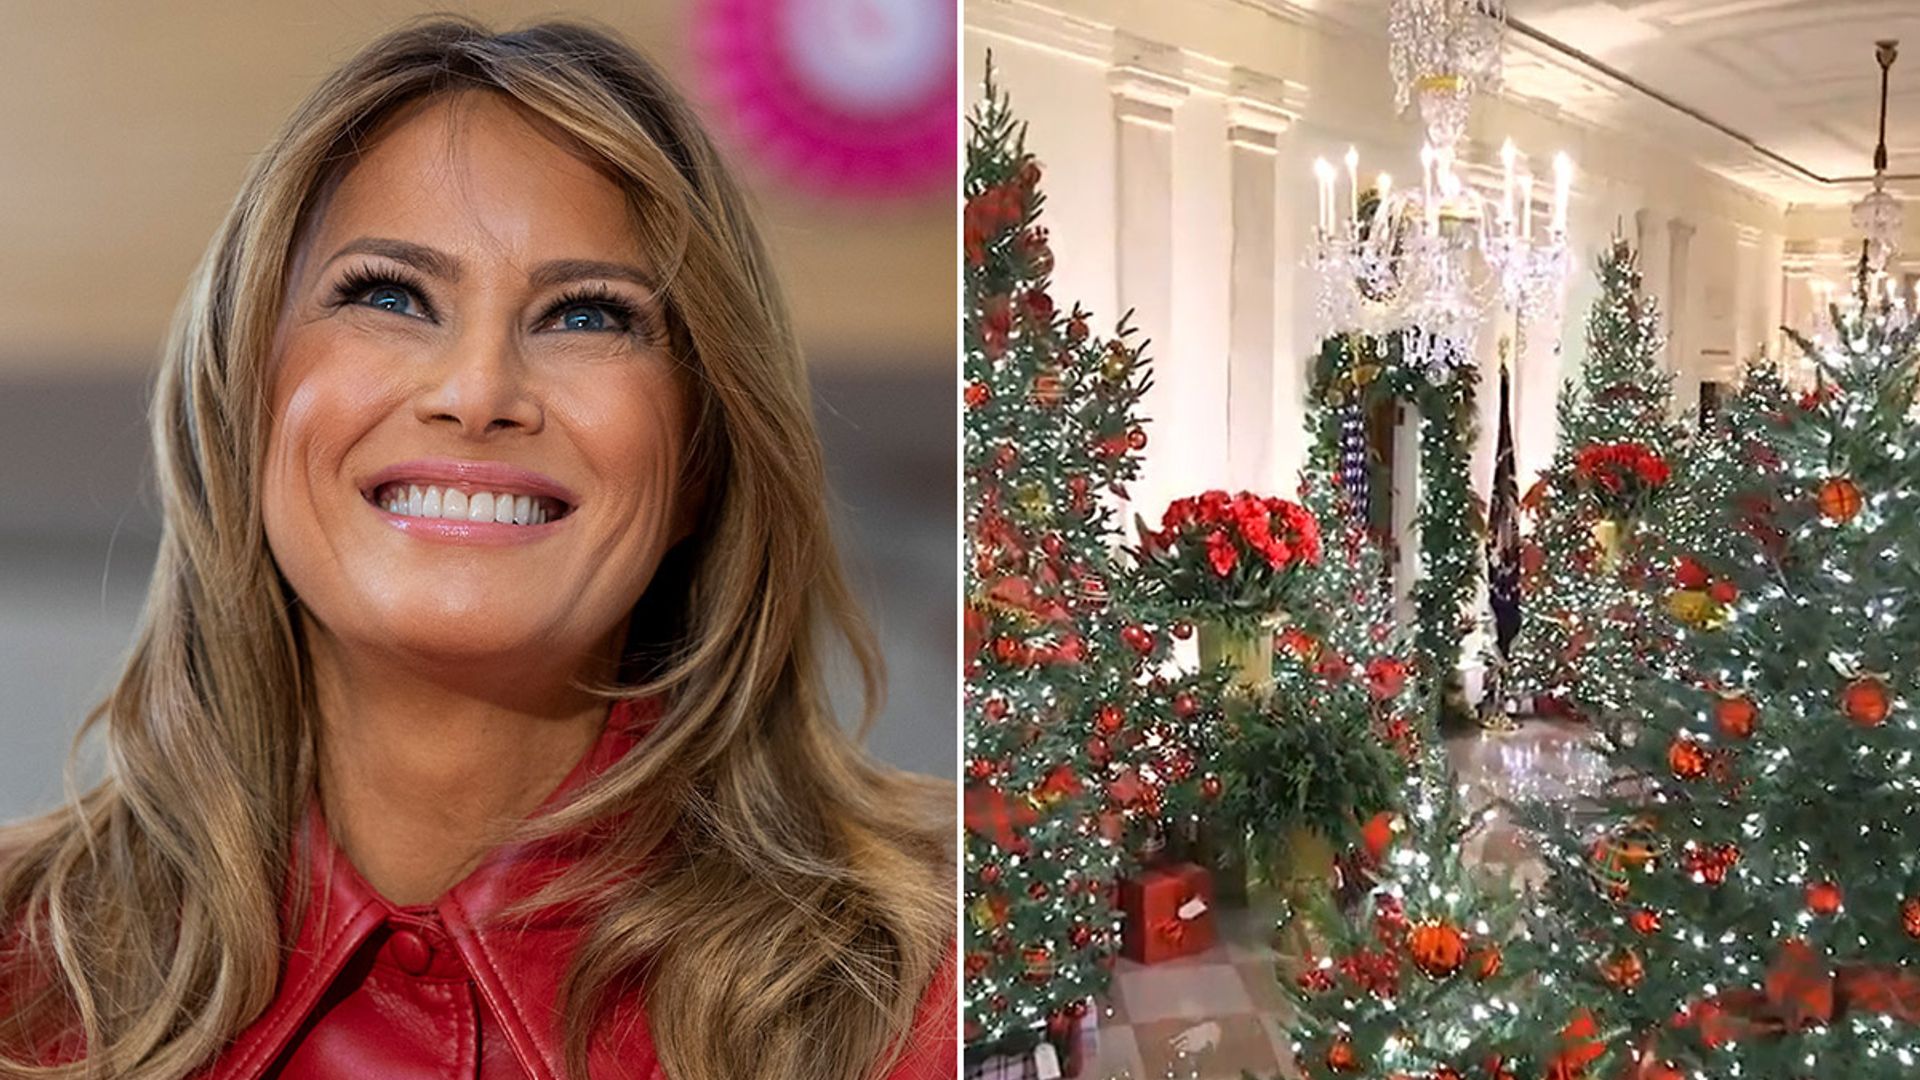 Melania Trump unveils last Christmas decorations in the White House - fans react